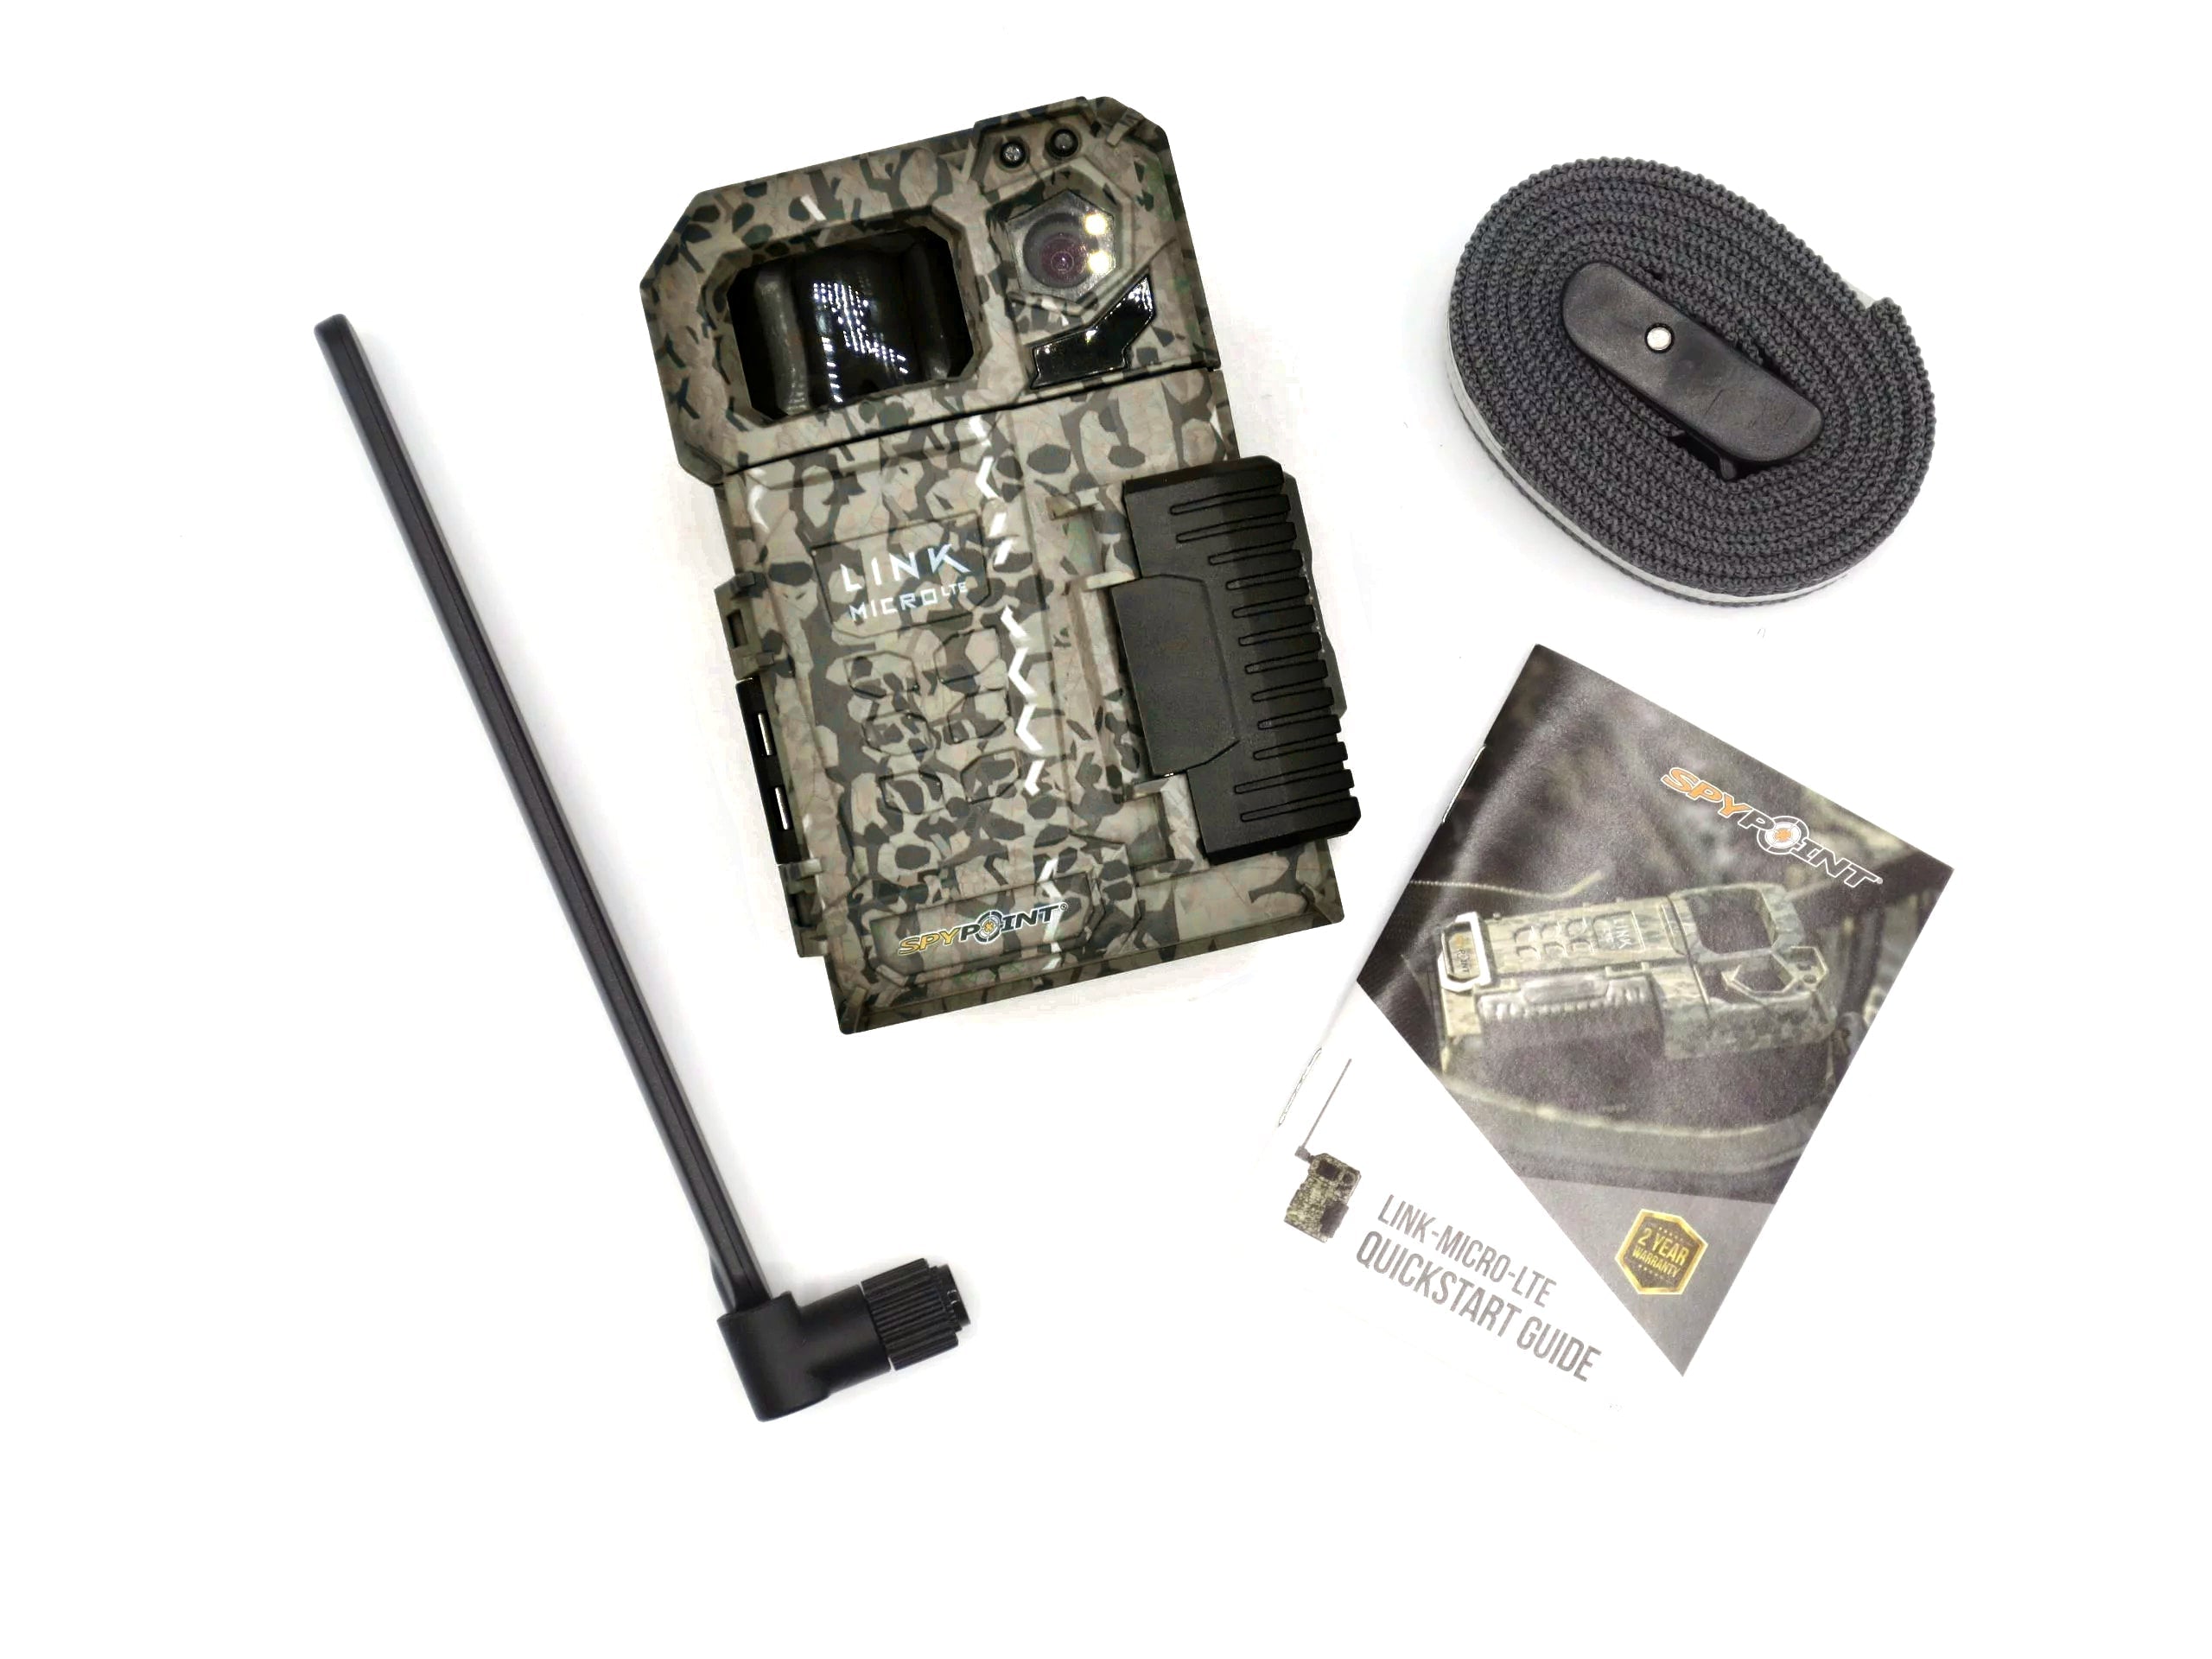 CLEARANCE Spypoint LINK-MICRO-LTE cellular Trail wildlife camera